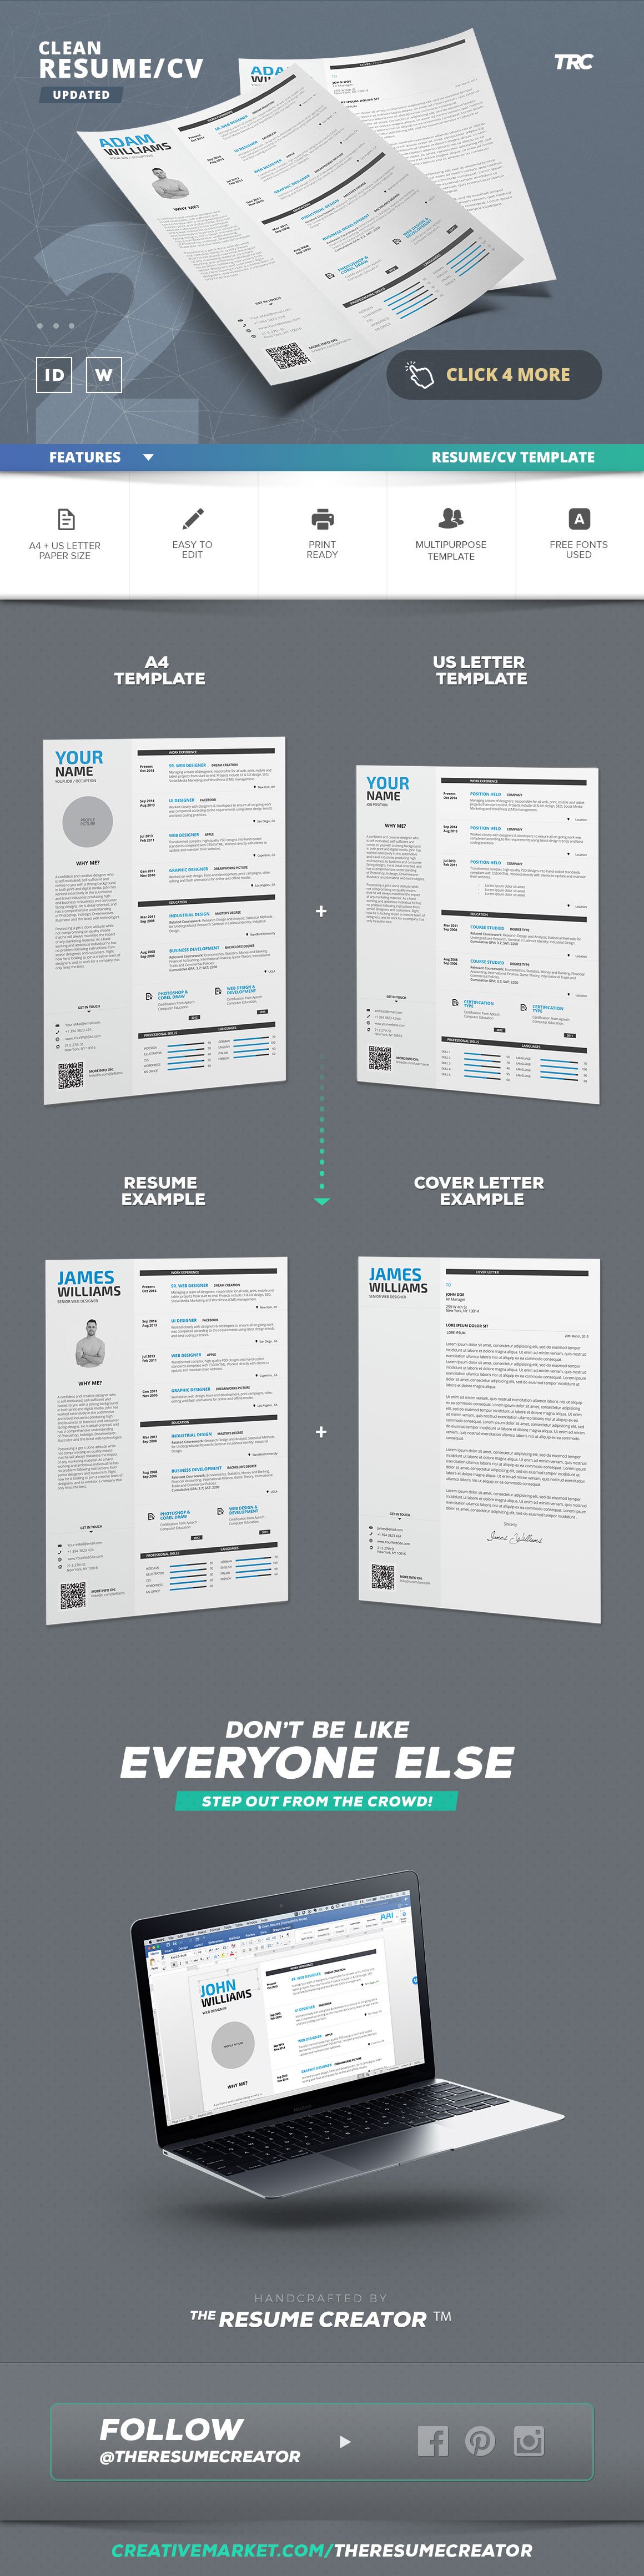 Clean Resume/Cv Template Volume 2 preview image.